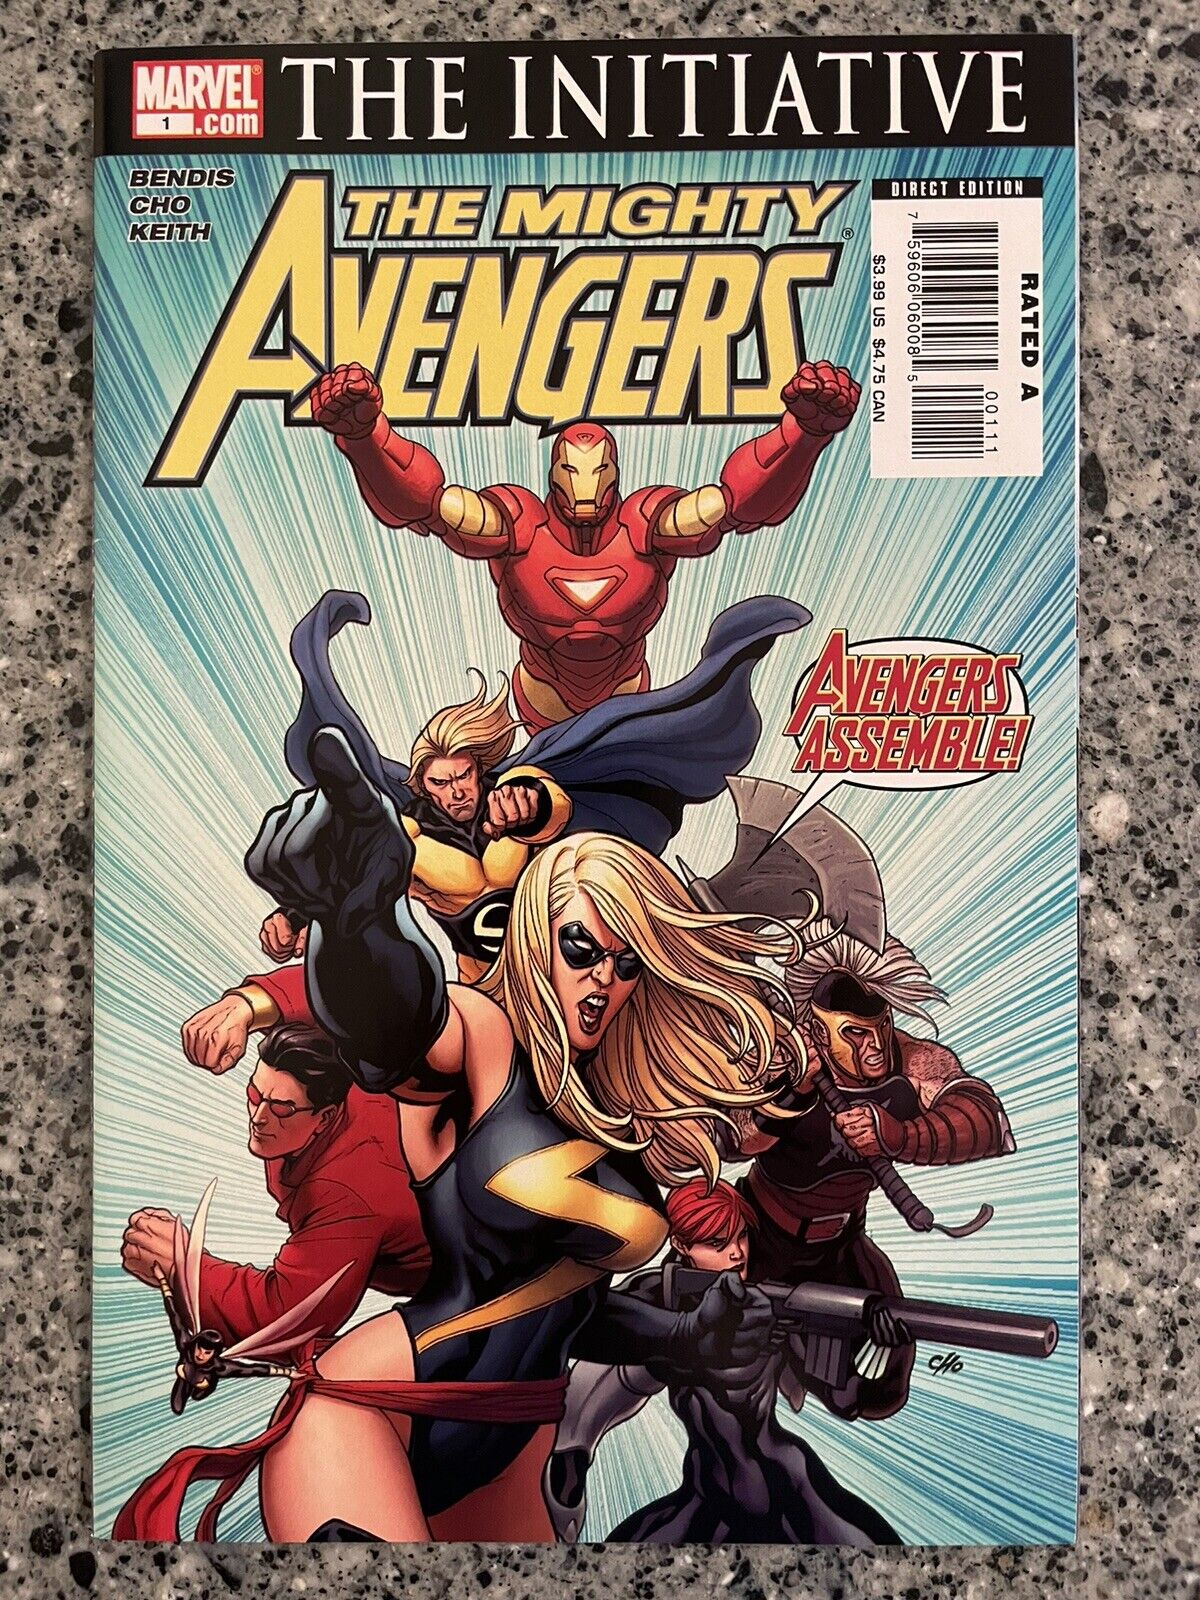 THE MIGHTY AVENGERS The Initiative #1 NM- (Marvel 2007) Hundreds More $1 Books